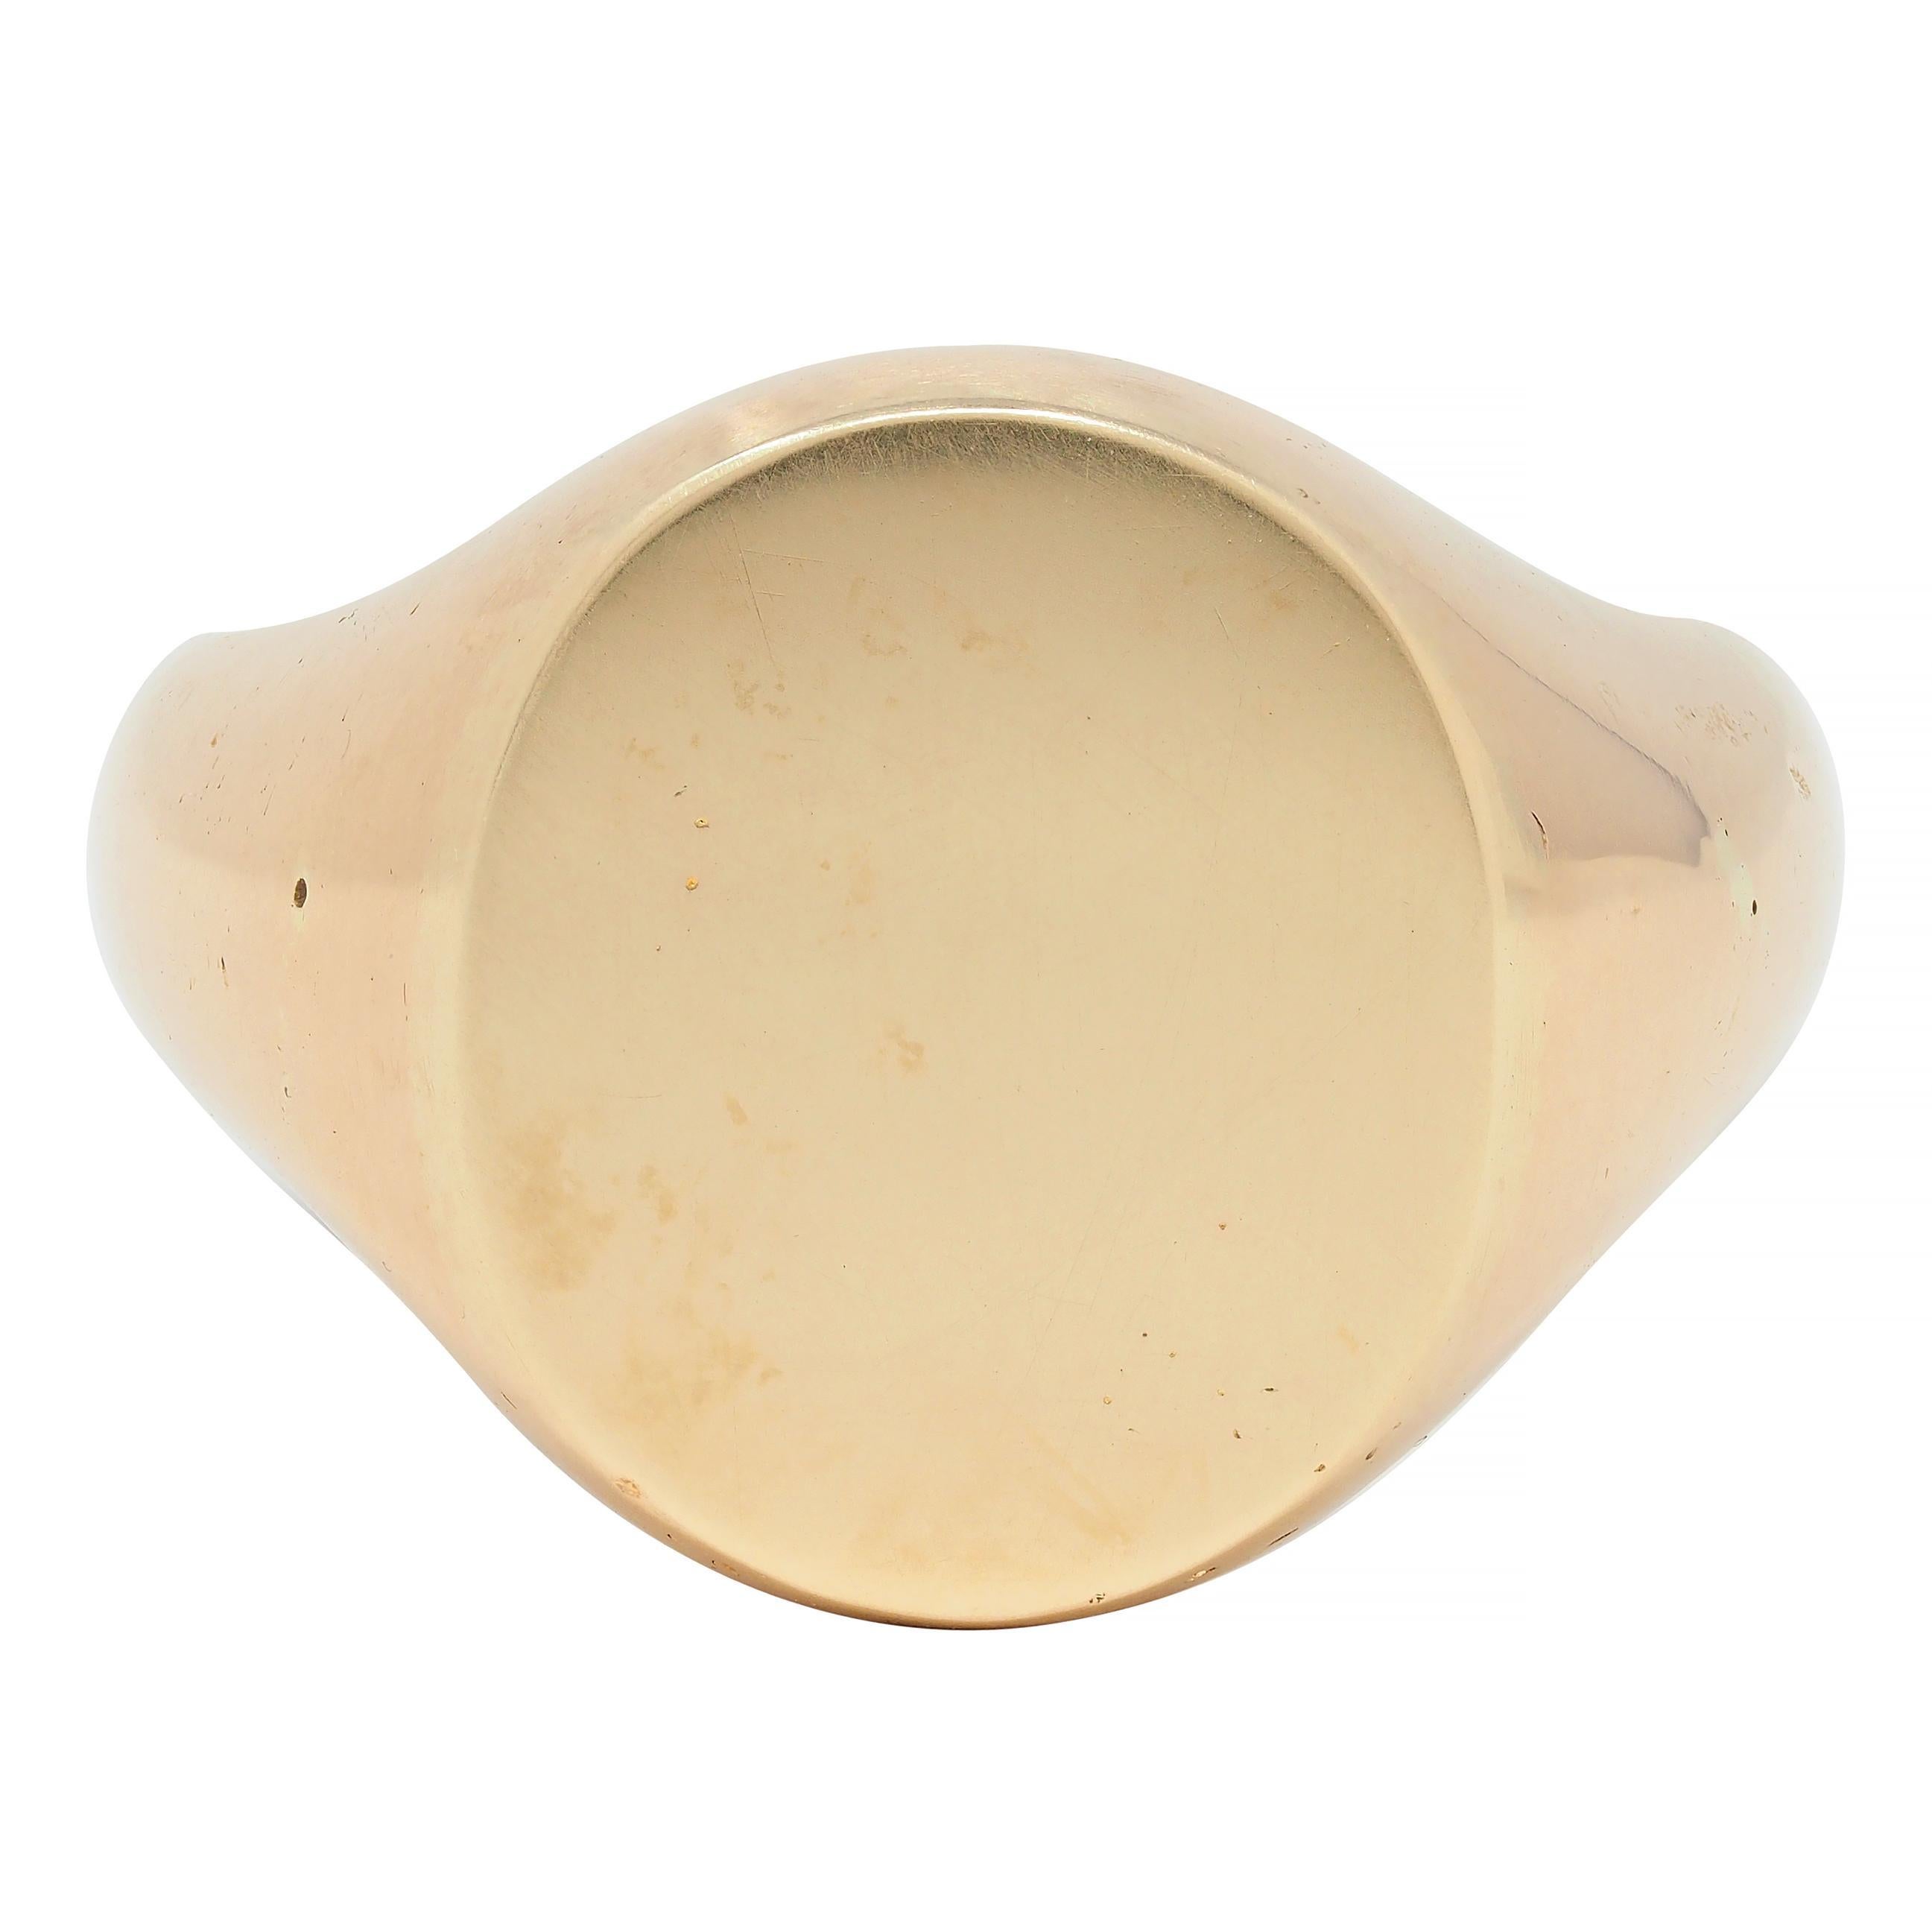 Signet style ring centers a high polish oval-shaped face
Foldable hidden key originally used for a jewelry box  
Featuring fluted shoulders 
Tested as 14 karat gold
Circa: 1880's
Ring size: 6.5 and sizable
Measures: North to South 14.5 mm and sits